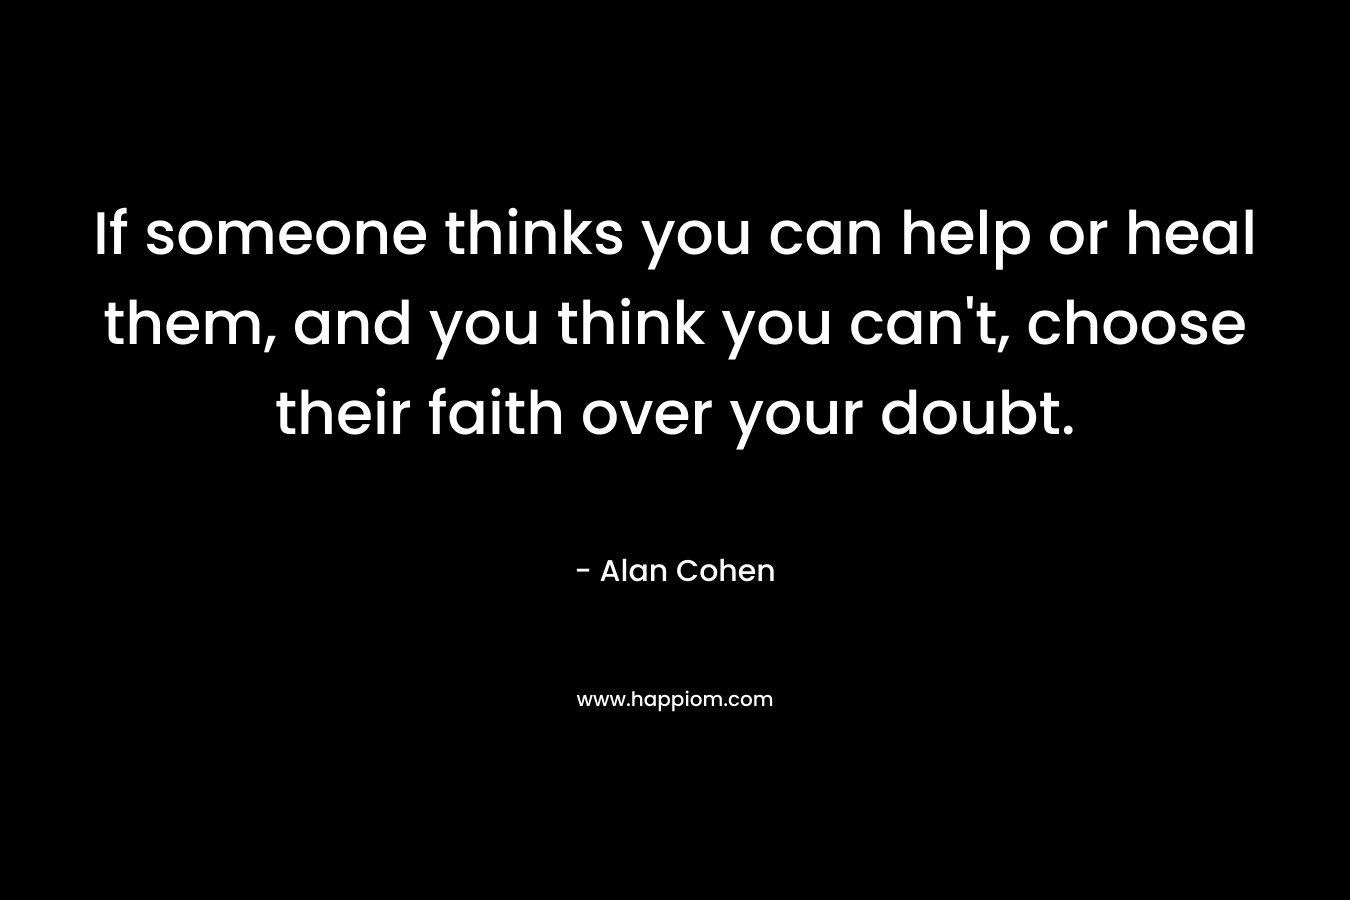 If someone thinks you can help or heal them, and you think you can’t, choose their faith over your doubt. – Alan Cohen